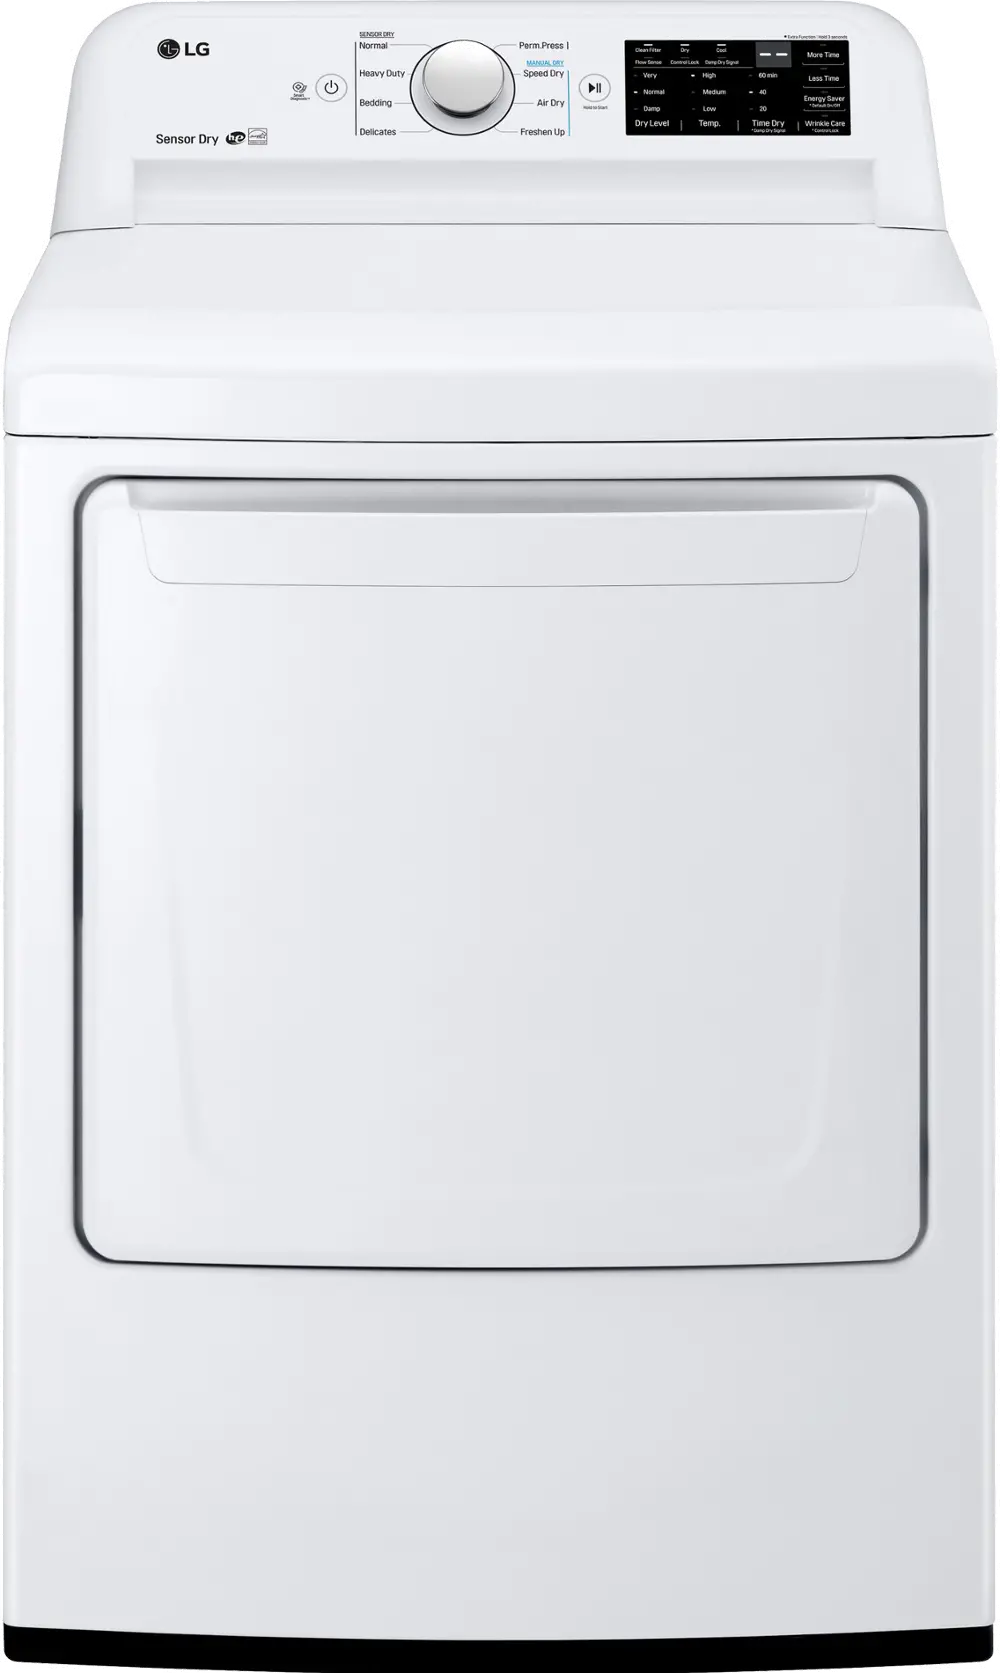 DLG7101W LG Gas Dryer with Dial-a-Cycle - White-1